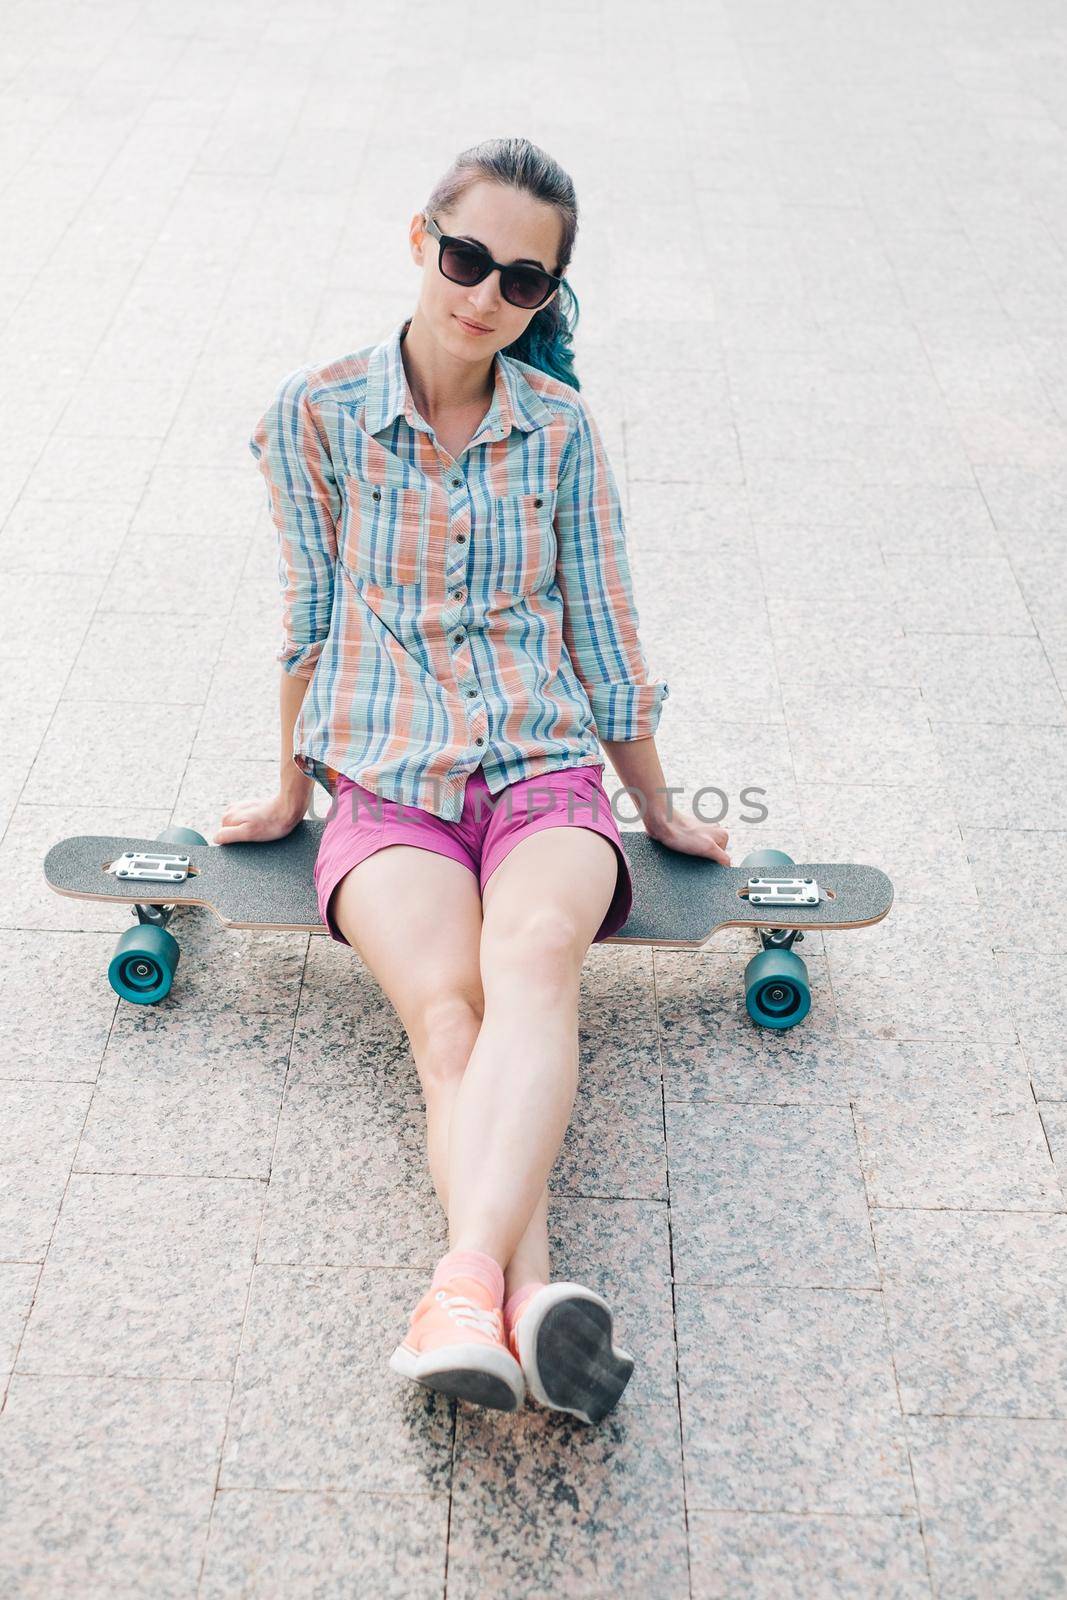 Smiling girl in sunglasses sitting on longboard, looking at camera.